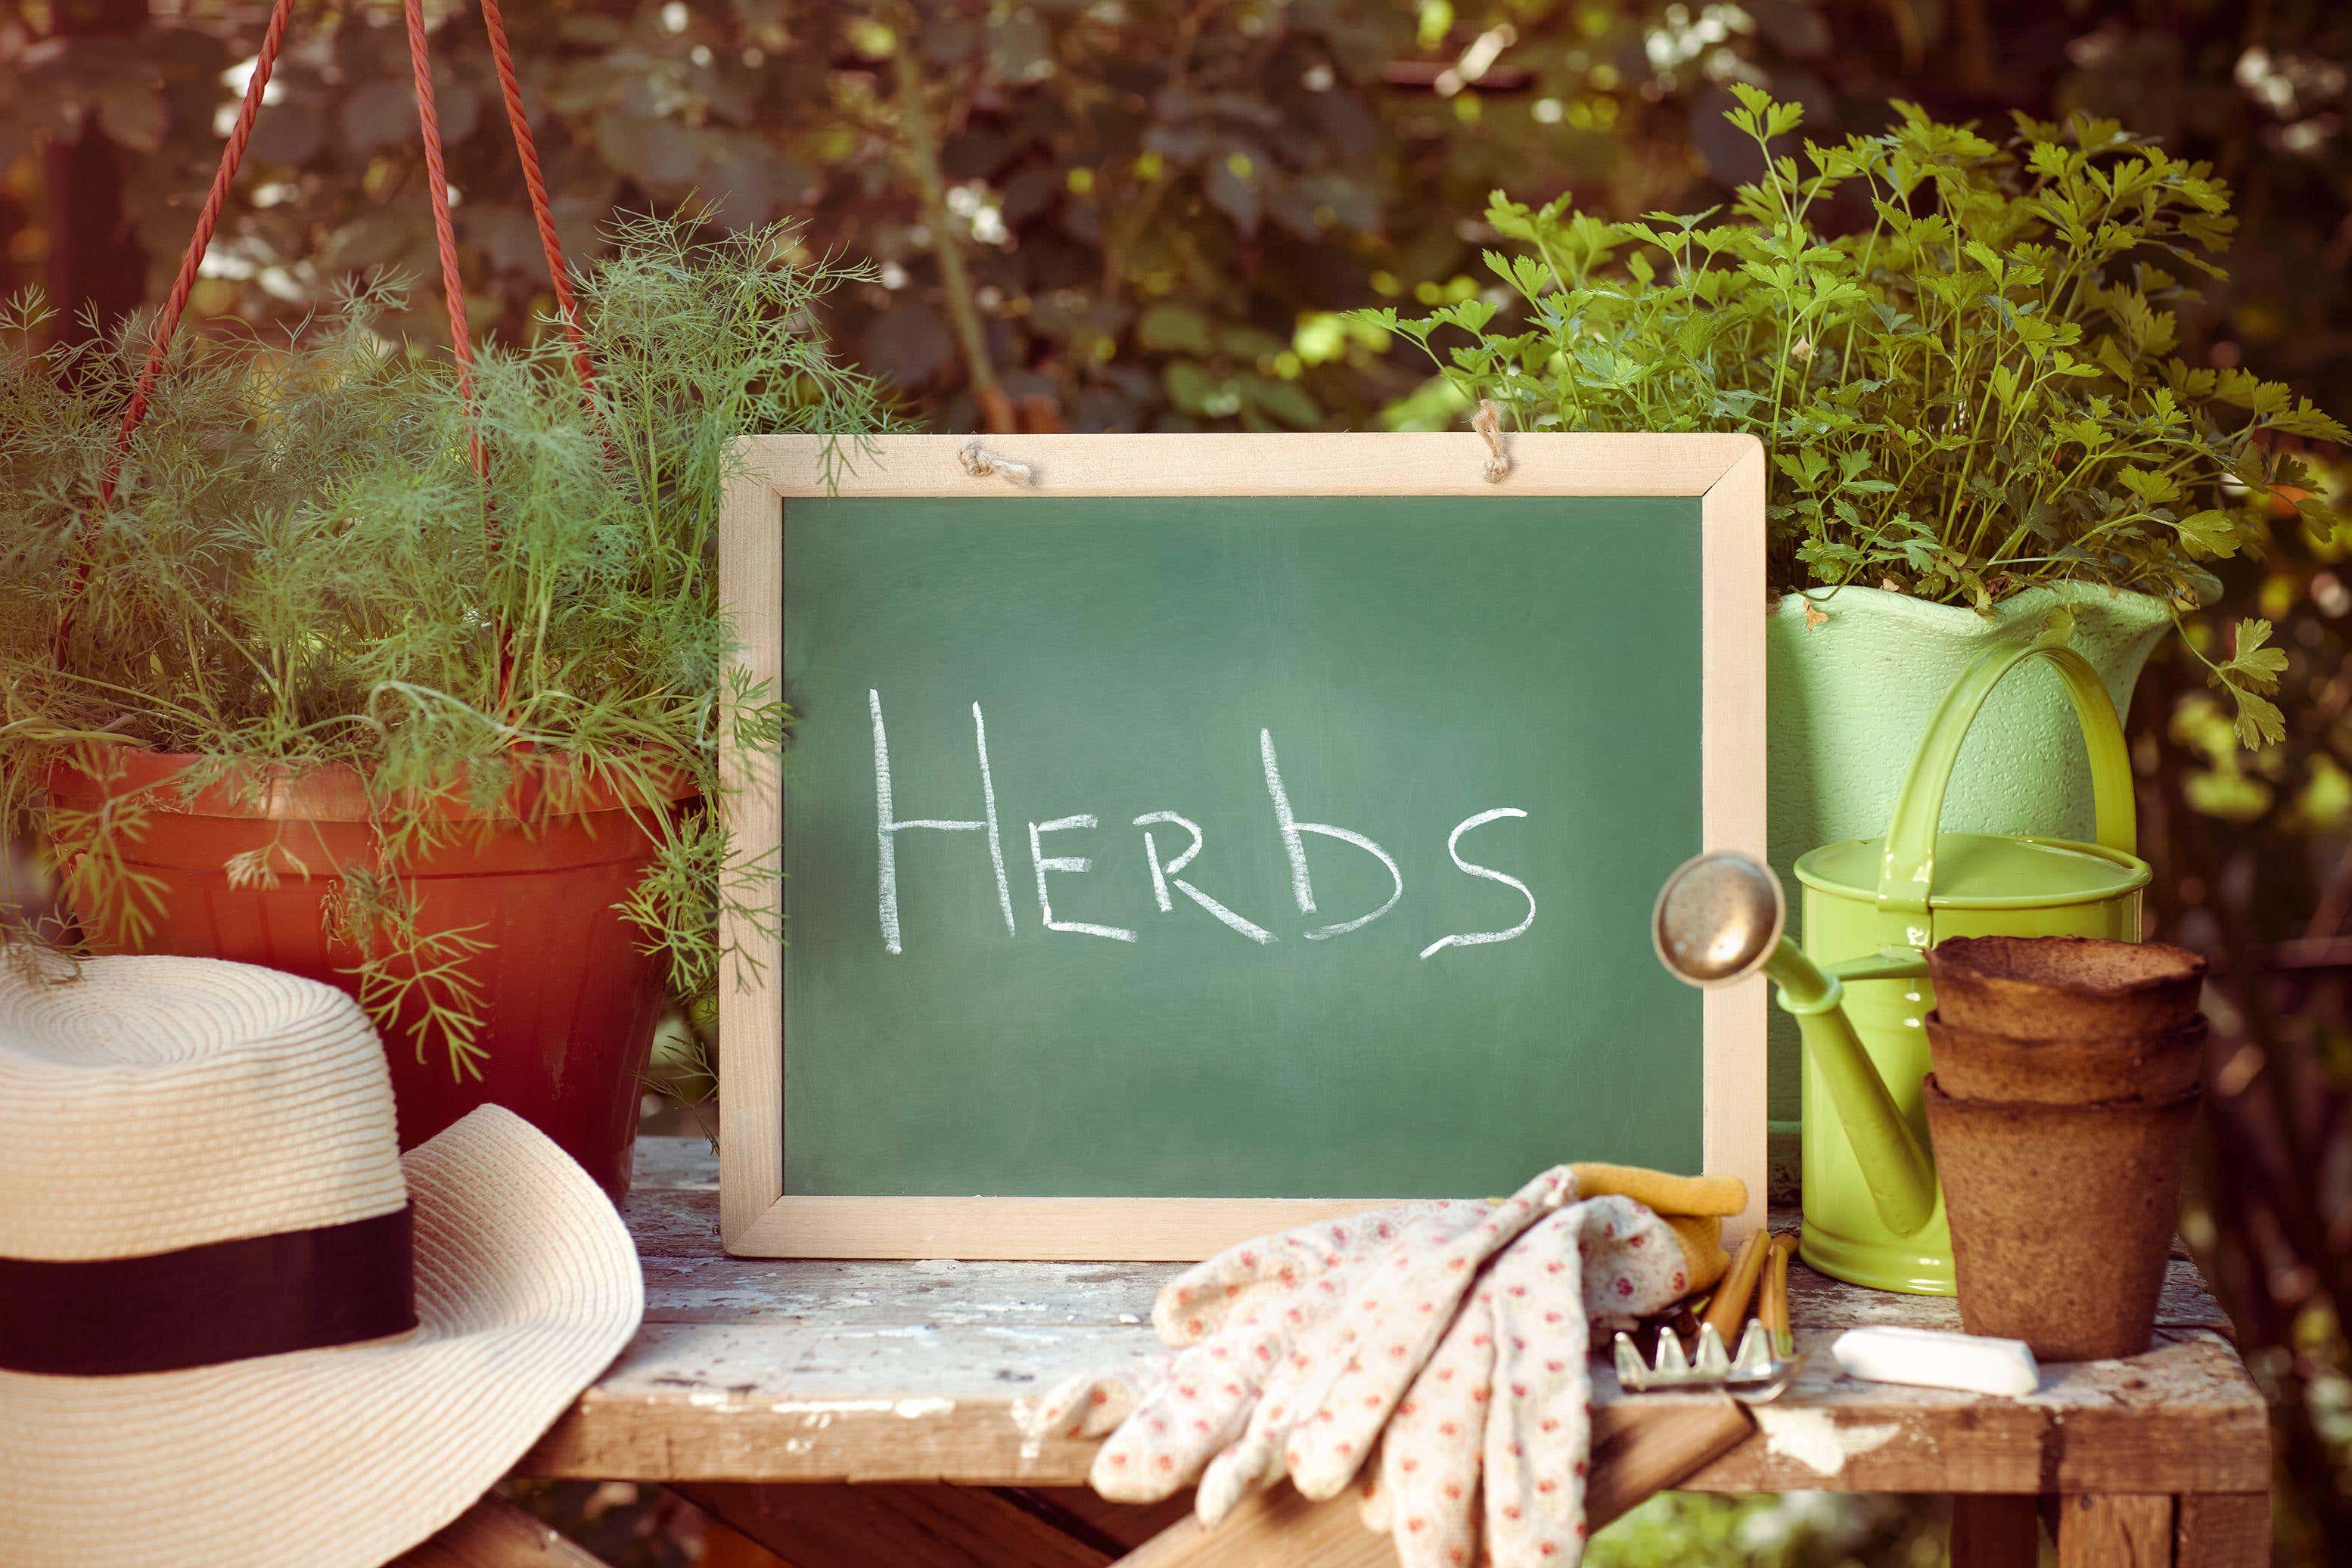 Growing herbs can be an enriching experience (Alamy/PA)